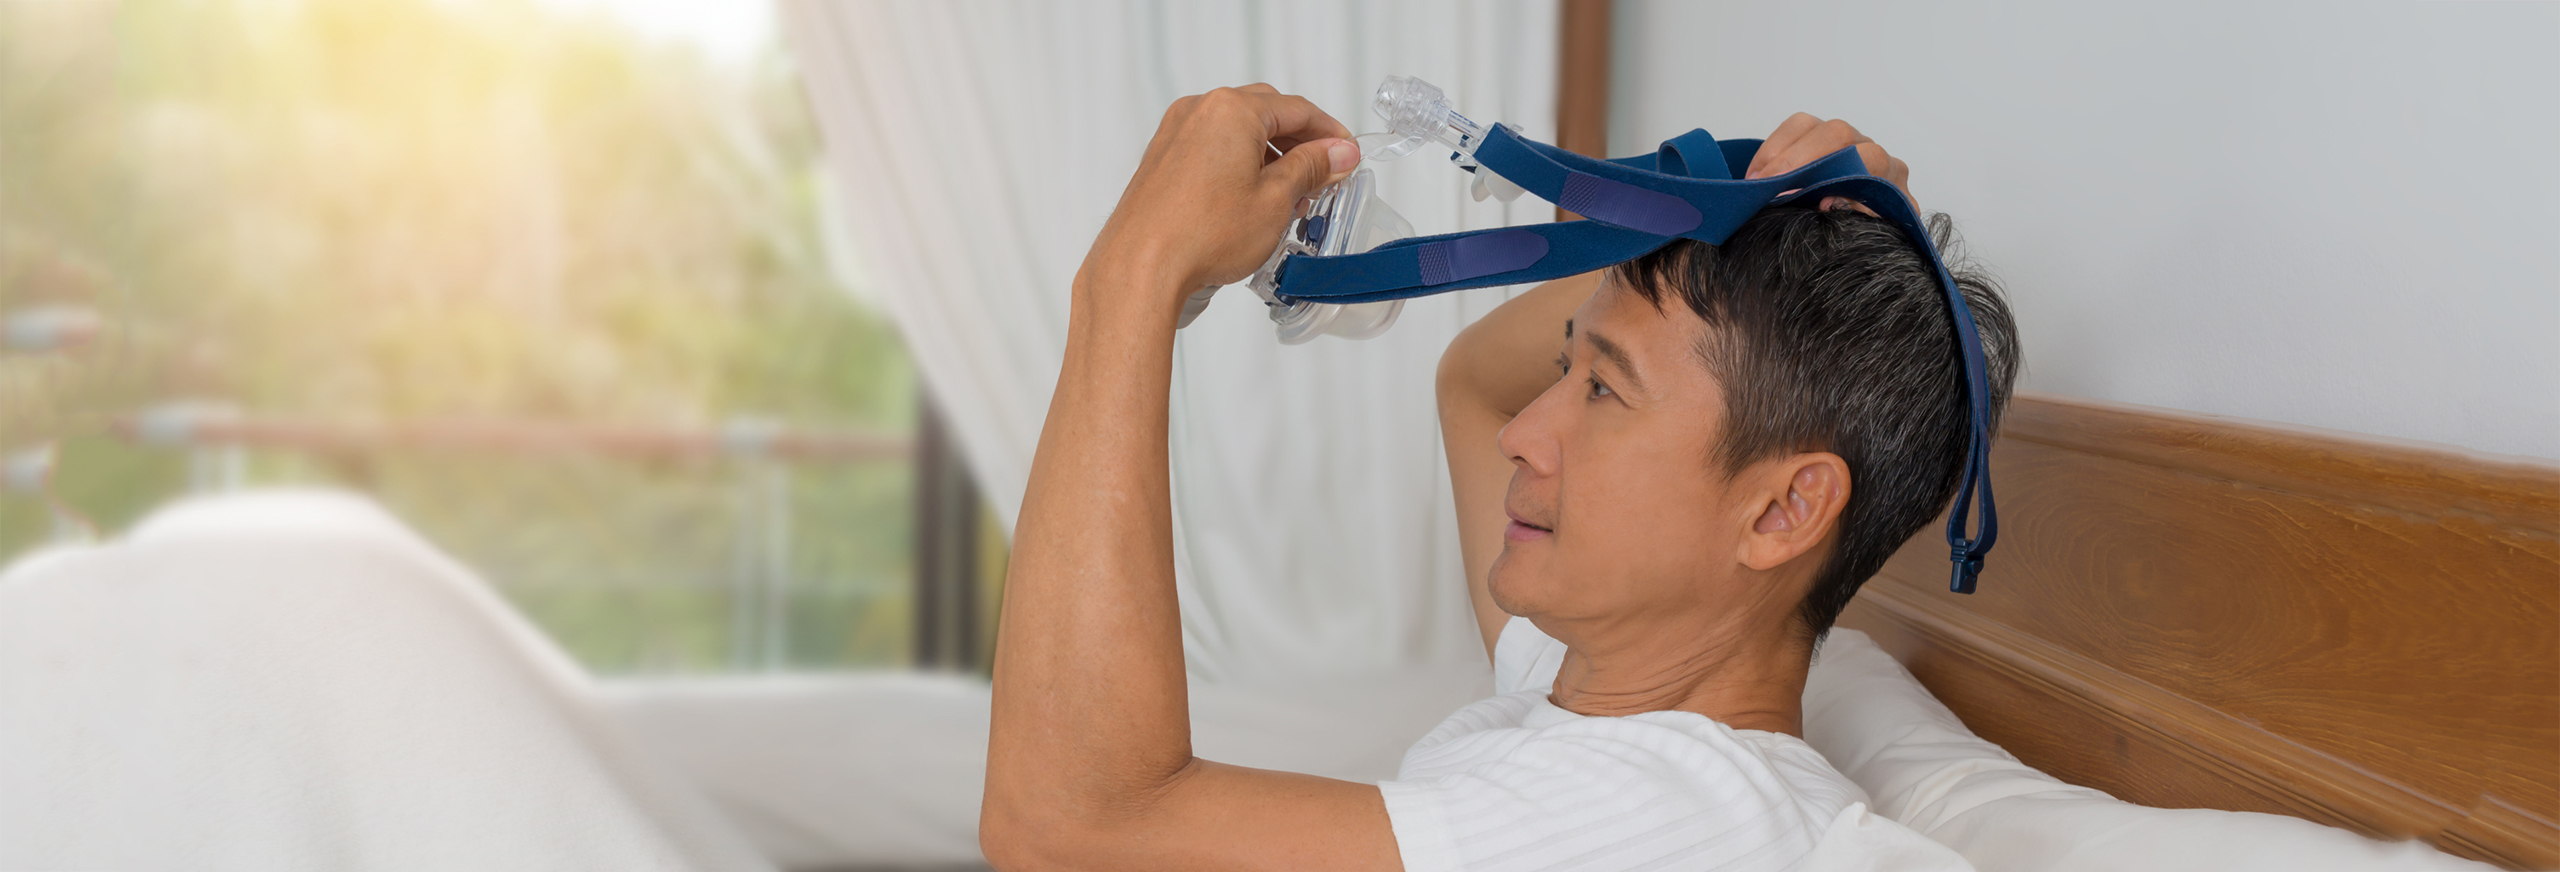 CPAP mask for sleep apnea therapy